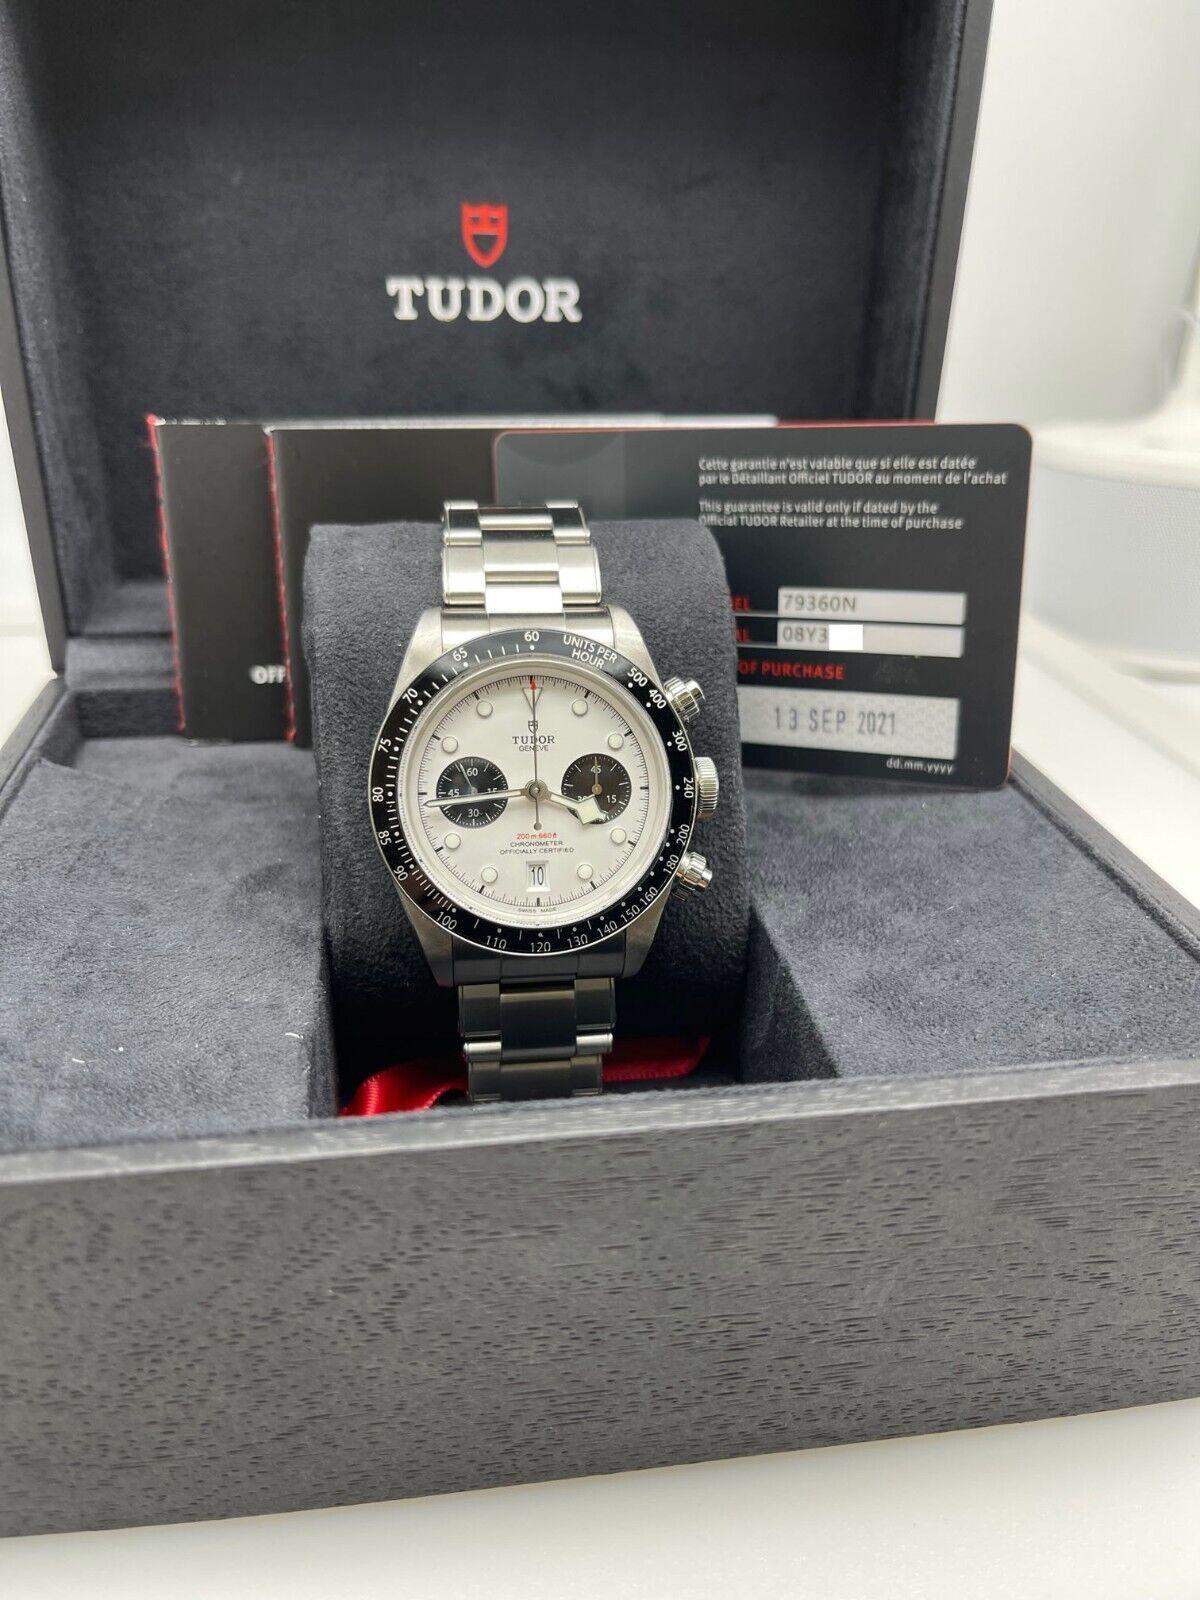 Style Number: 79360N 

Serial: 08Y3***

Year: 2021 

Model: Black Bay 

Case Material: Stainless Steel

Band: Stainless Steel

Bezel: Black Aluminum

Dial: 